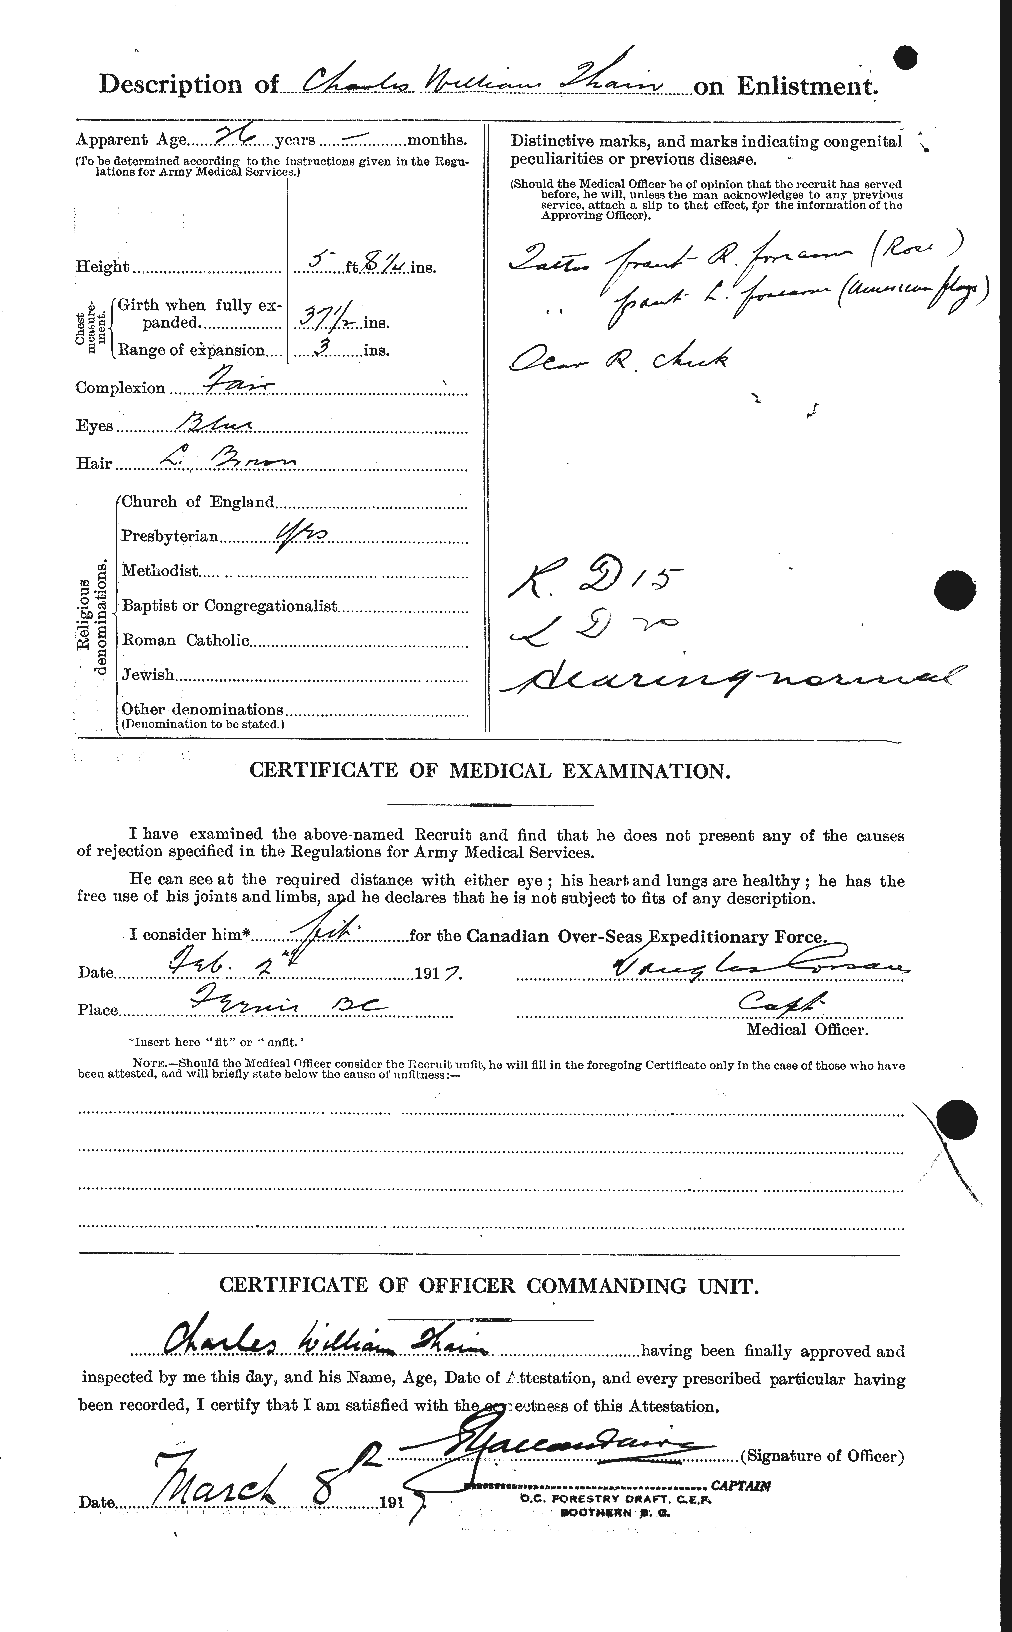 Personnel Records of the First World War - CEF 629450b